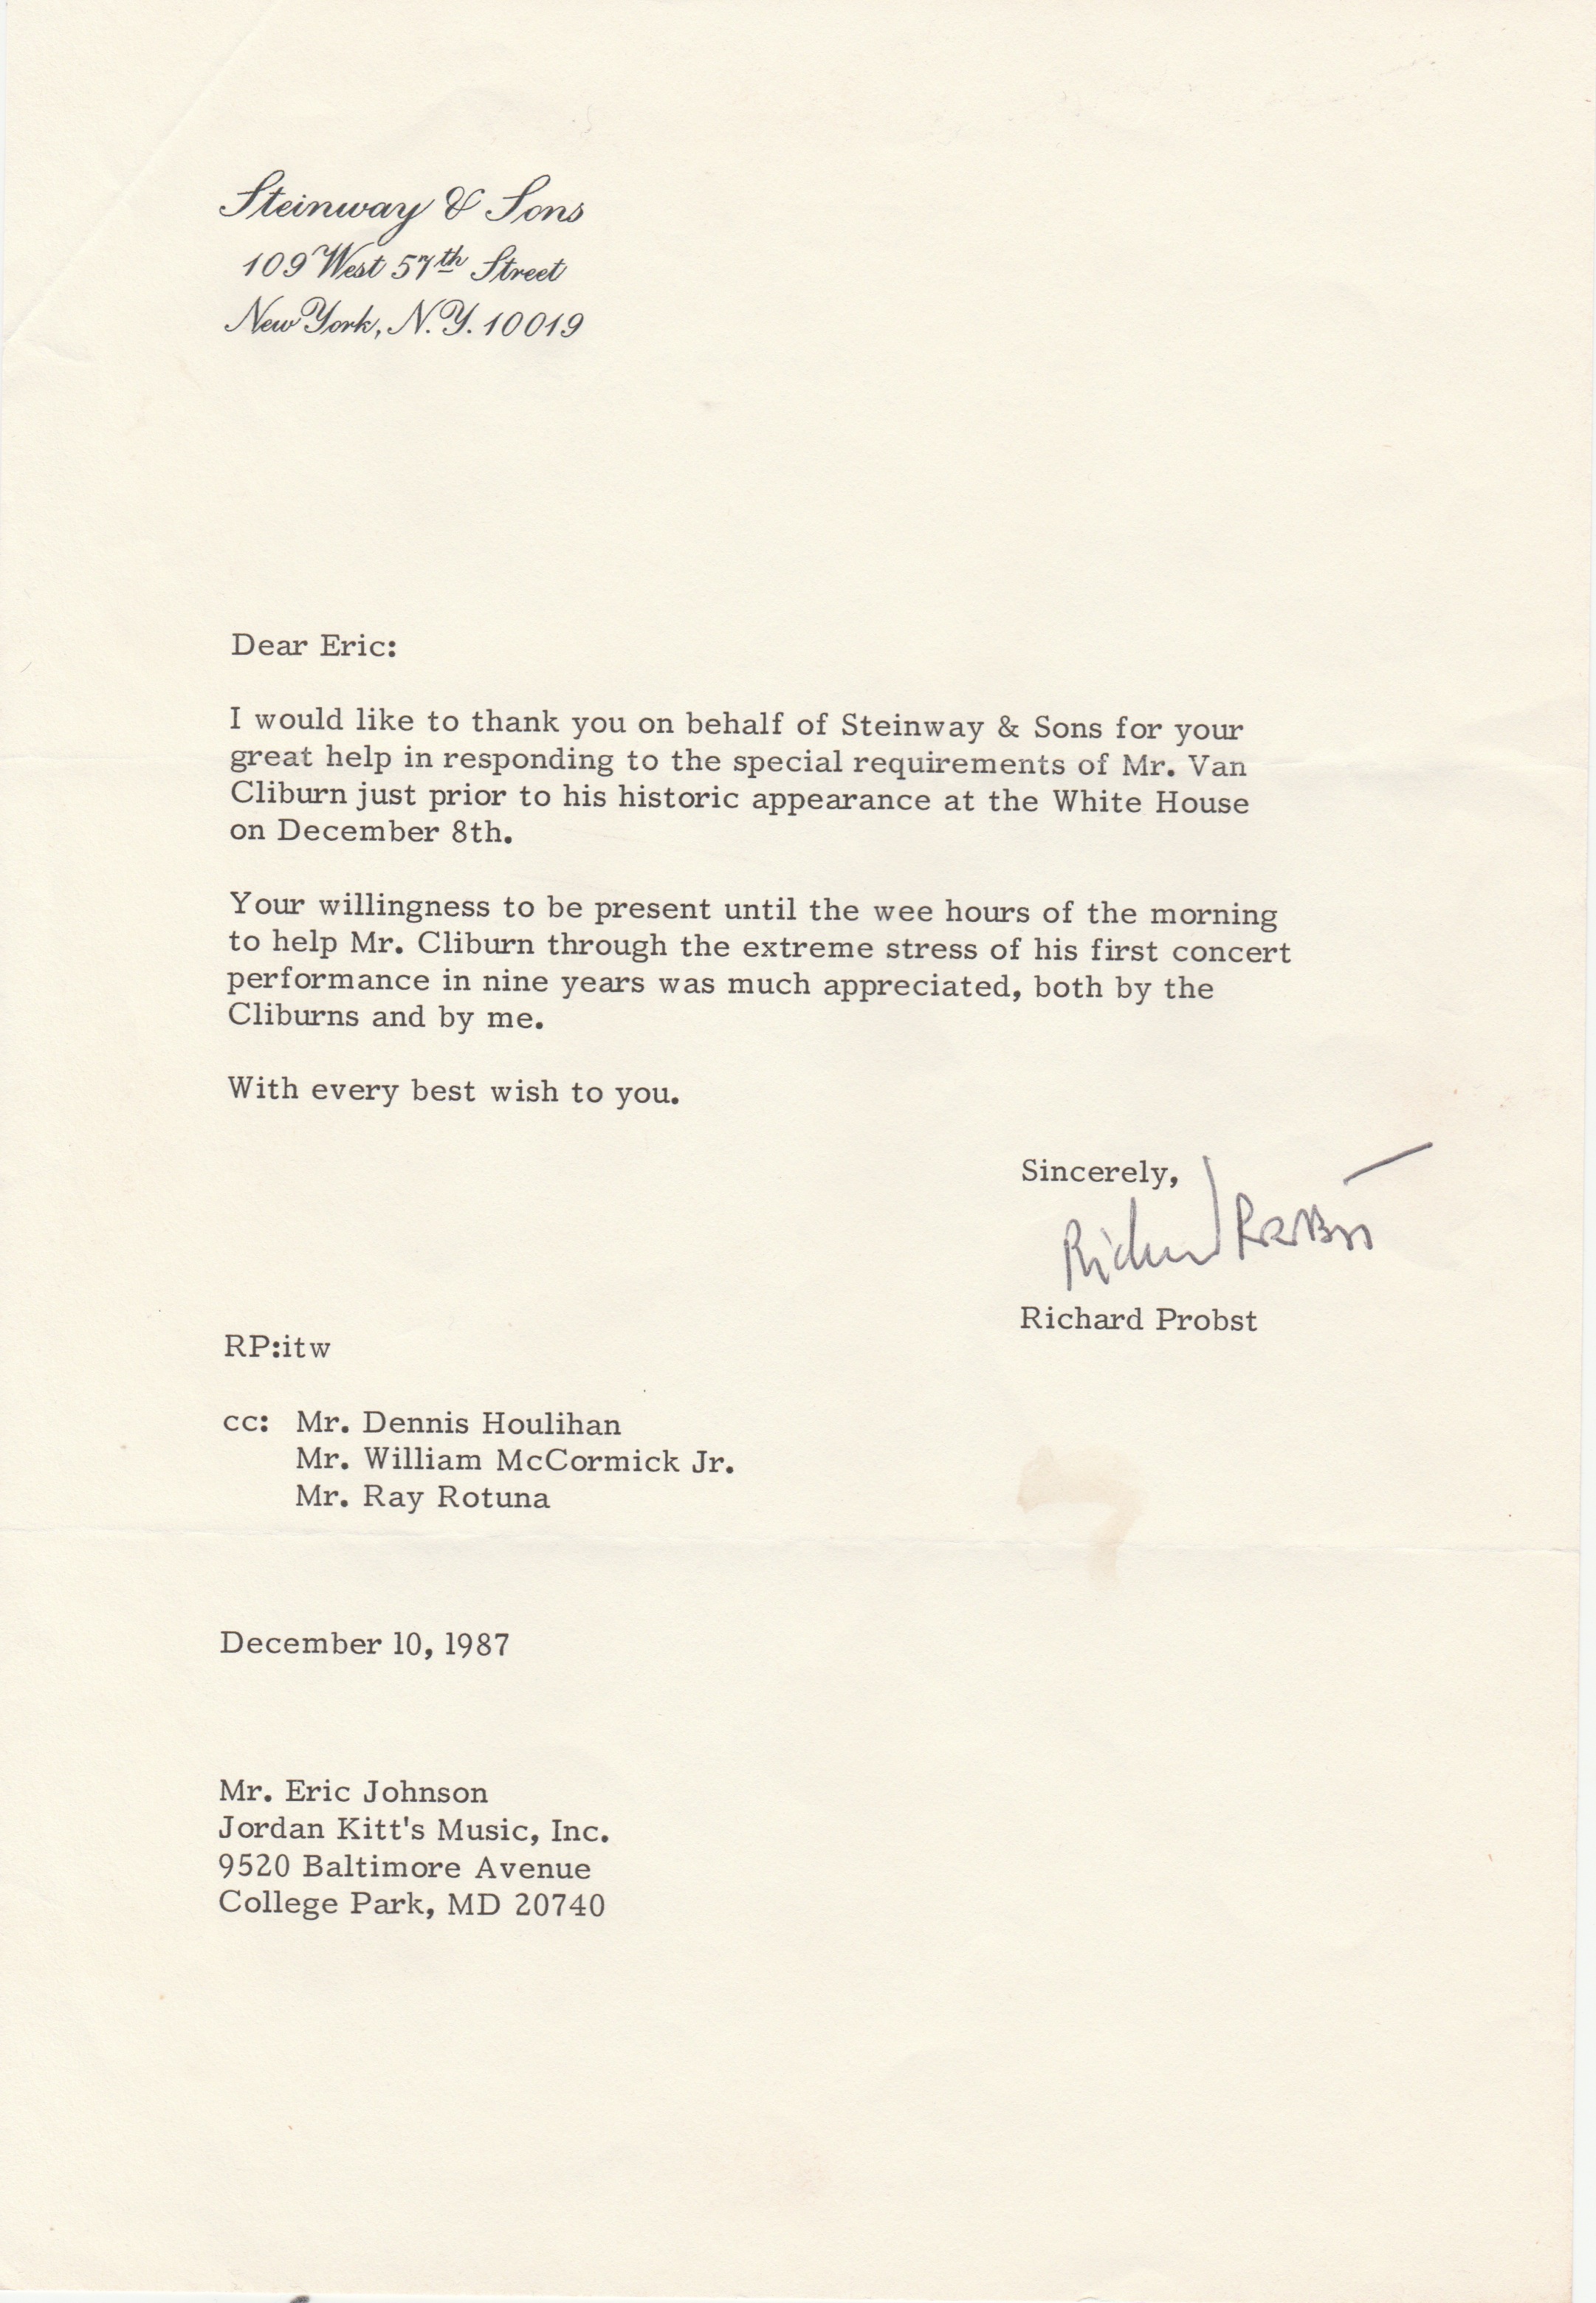 A letter from Steinway